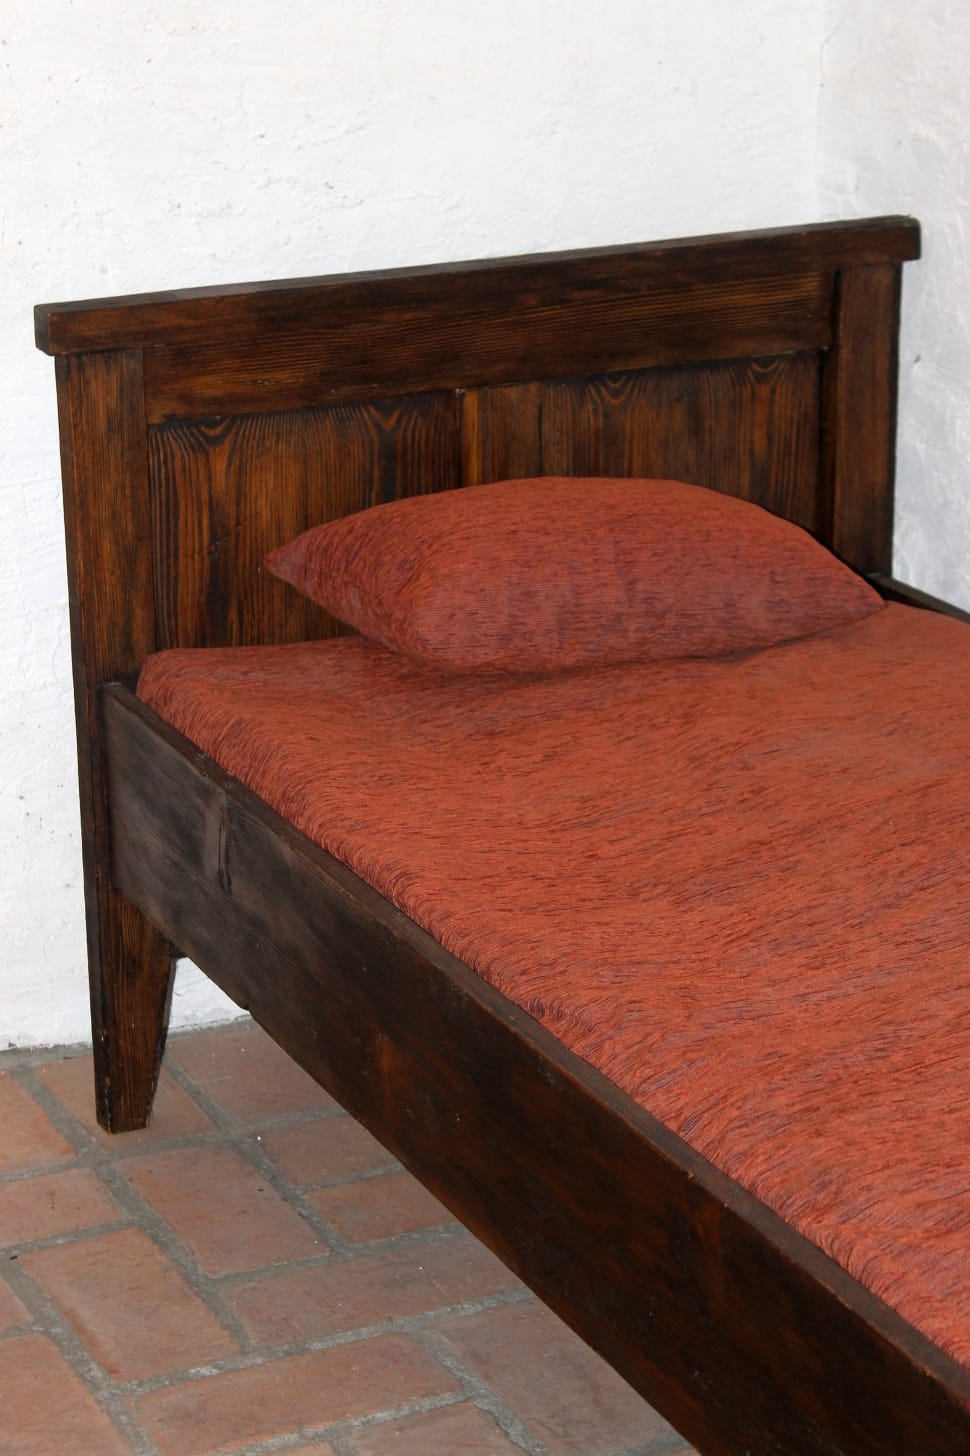 brown wooden bed frame with red fabric padded bed mattrsss preview